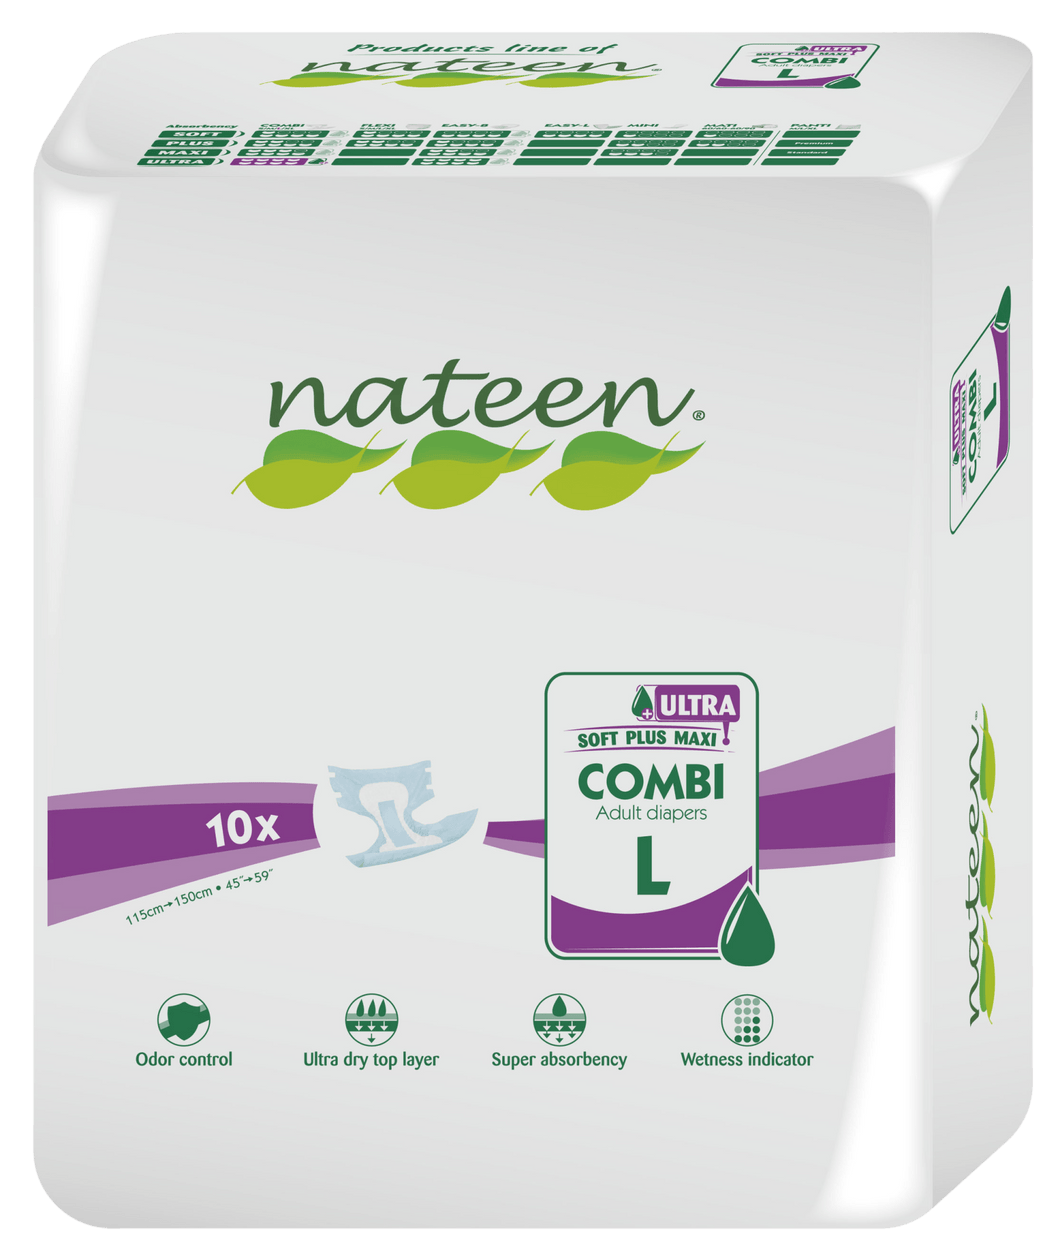 Nateen Combi X-Ultra Adult Briefs - Nateen Canada - 5420072710945 - Adult Briefs - babywipes nateen canada premium diapers biodegradable sustainable ecoliving ecofriendly toronto vancouver extremely soft co